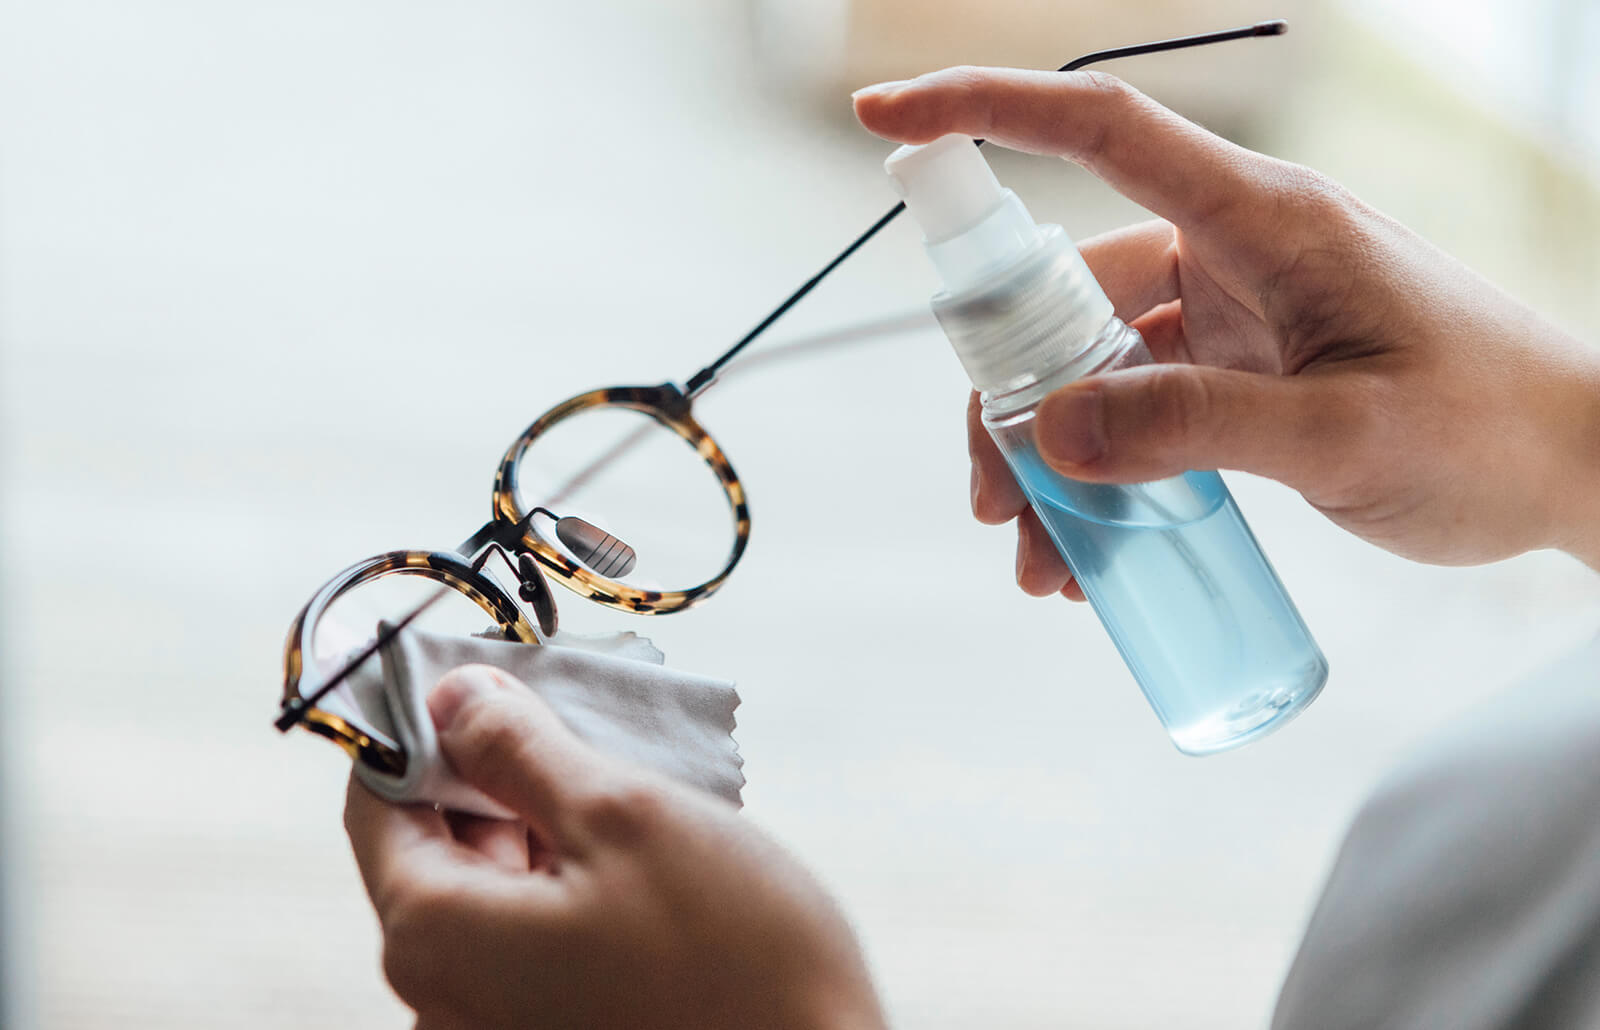 How To Make Eyeglass Cleaner